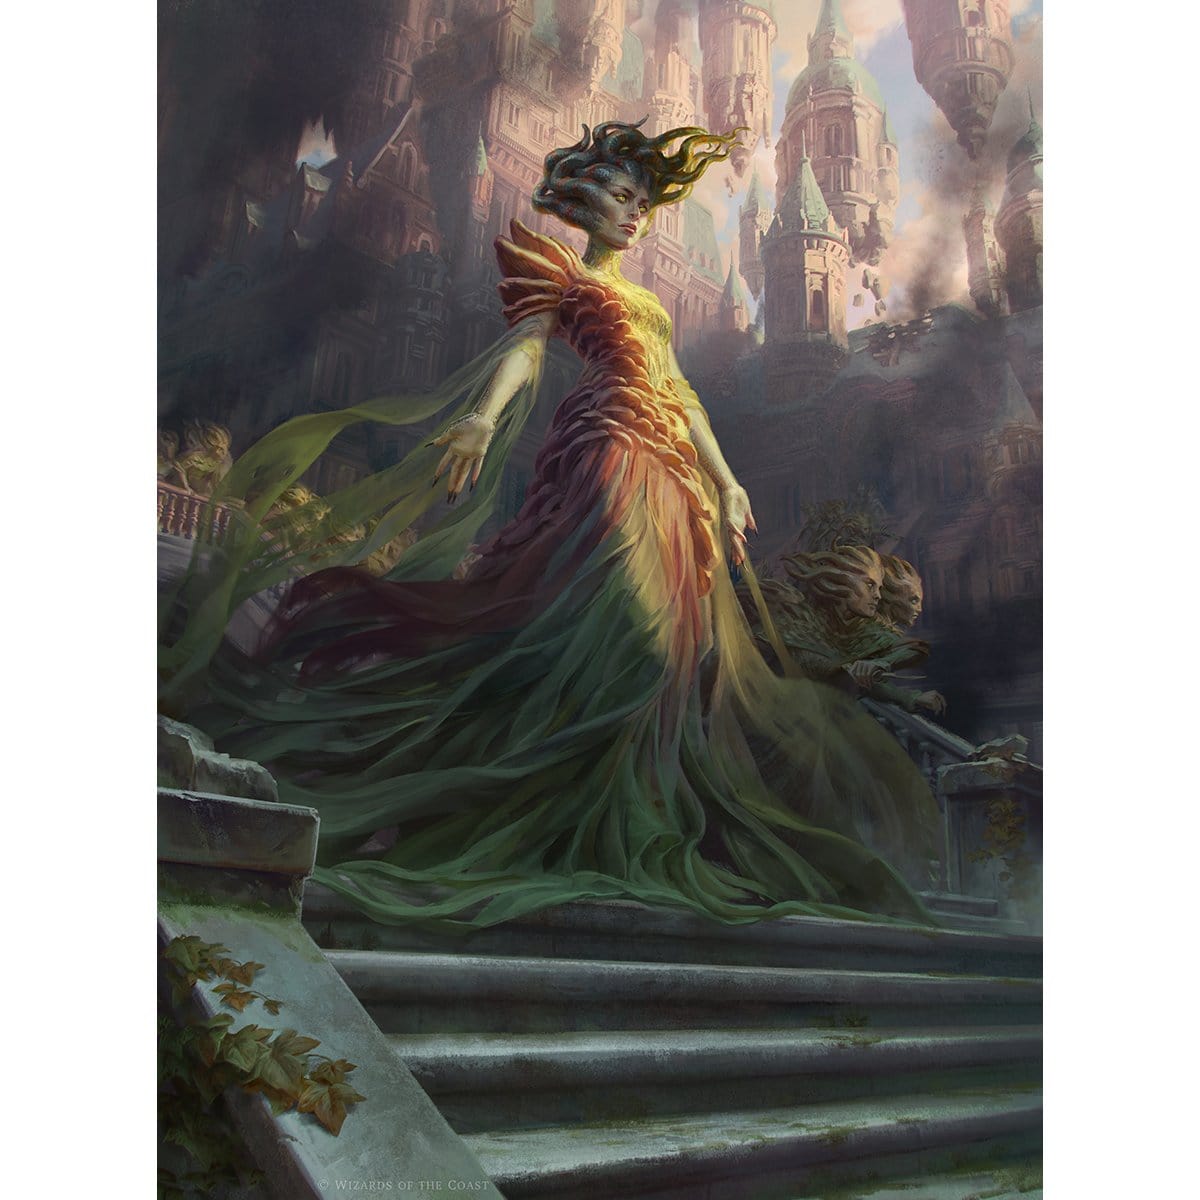 Vraska, Swarm's Embrace Print - Print - Original Magic Art - Accessories for Magic the Gathering and other card games